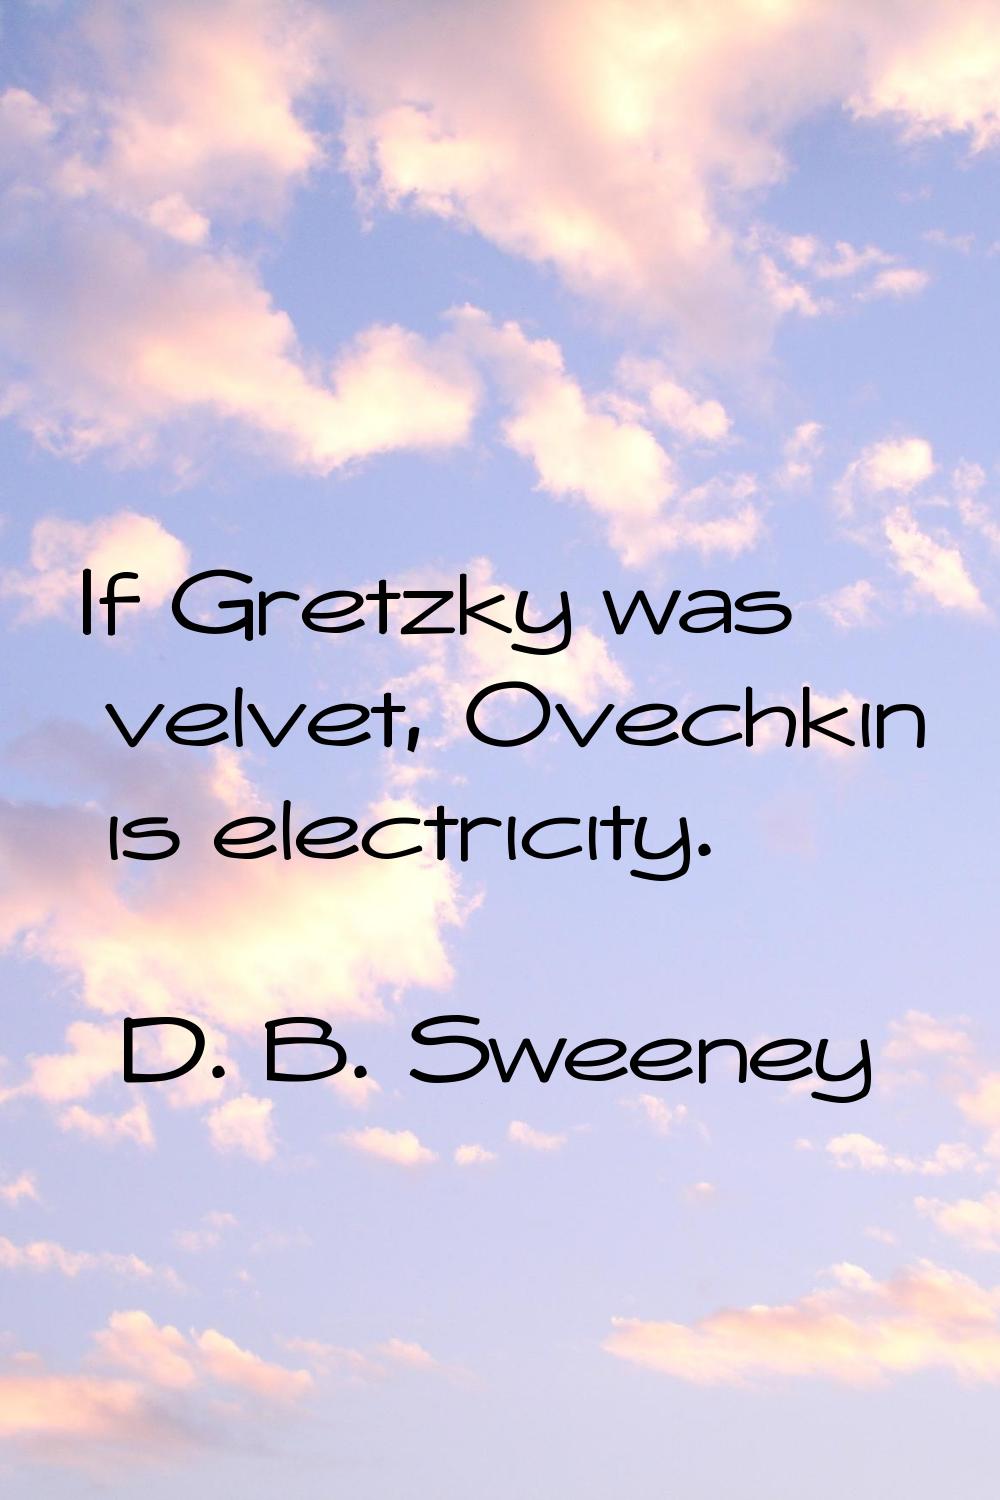 If Gretzky was velvet, Ovechkin is electricity.